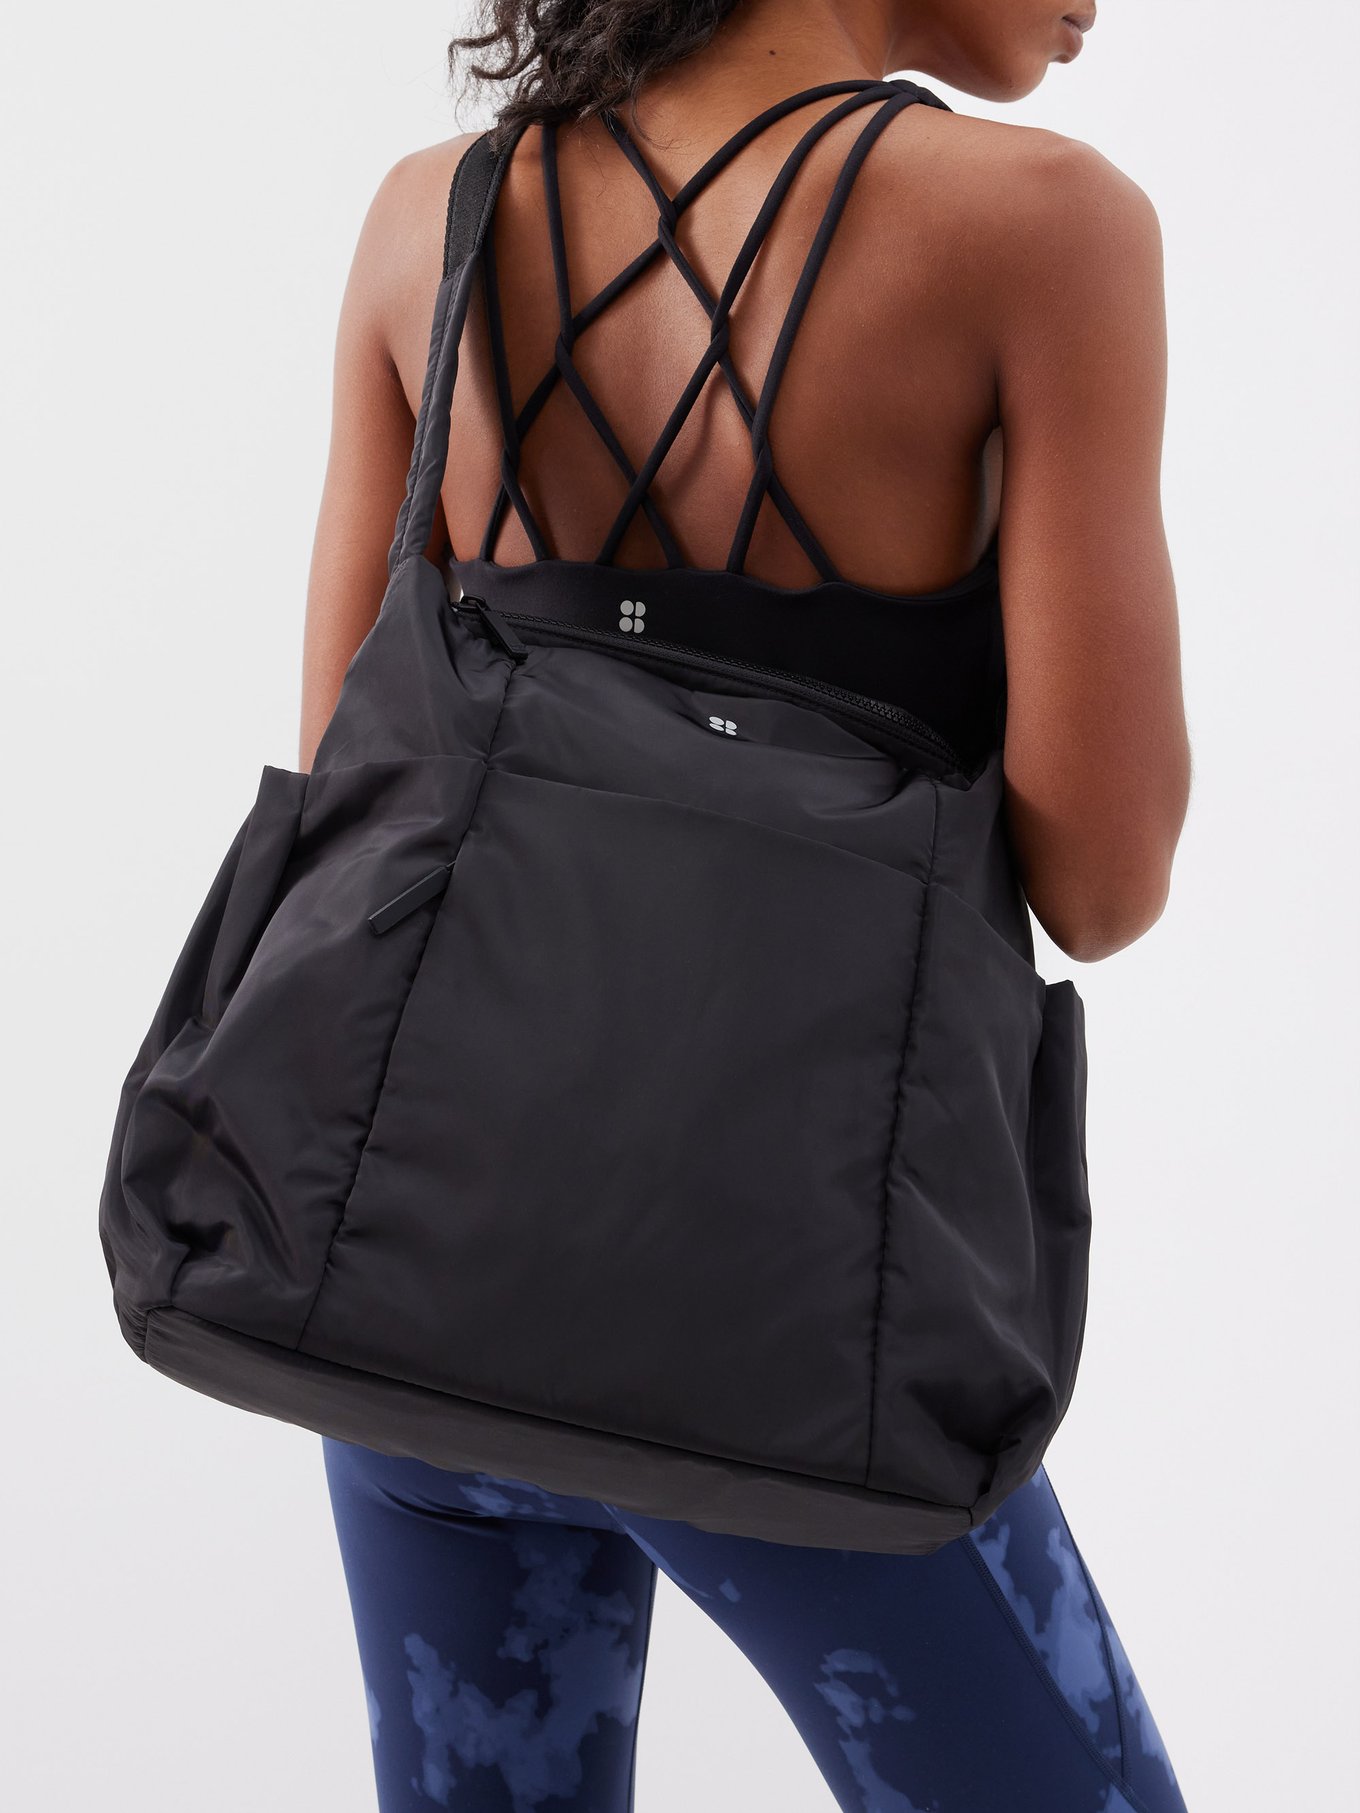 Sweaty Betty Icon Convertible Backpack, Black, Women's One Size